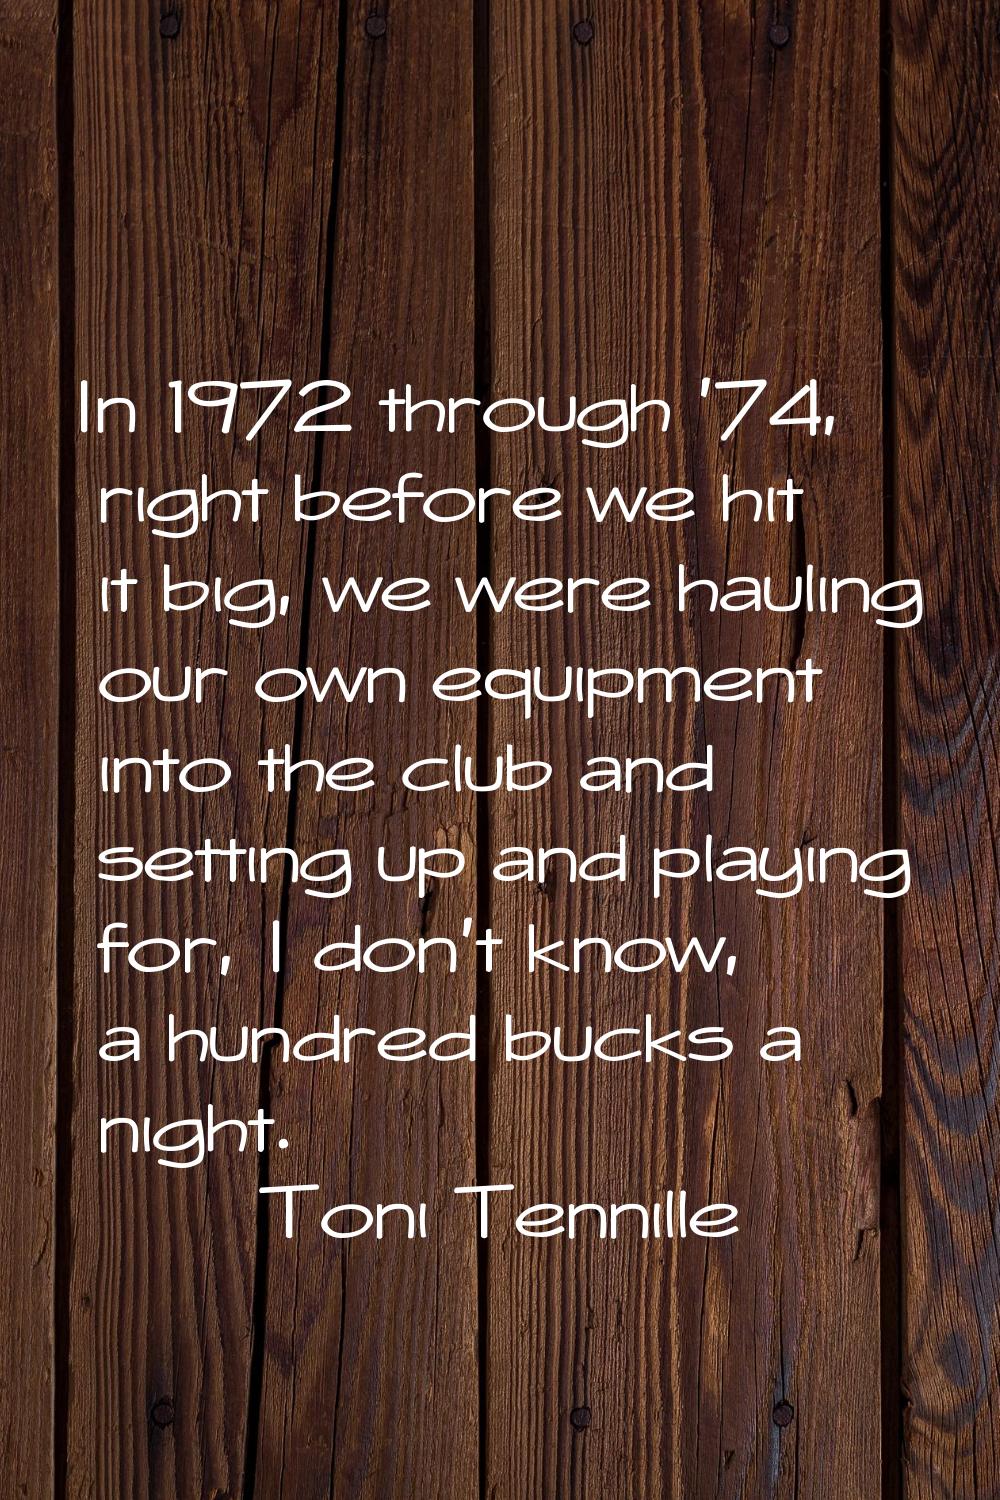 In 1972 through '74, right before we hit it big, we were hauling our own equipment into the club an